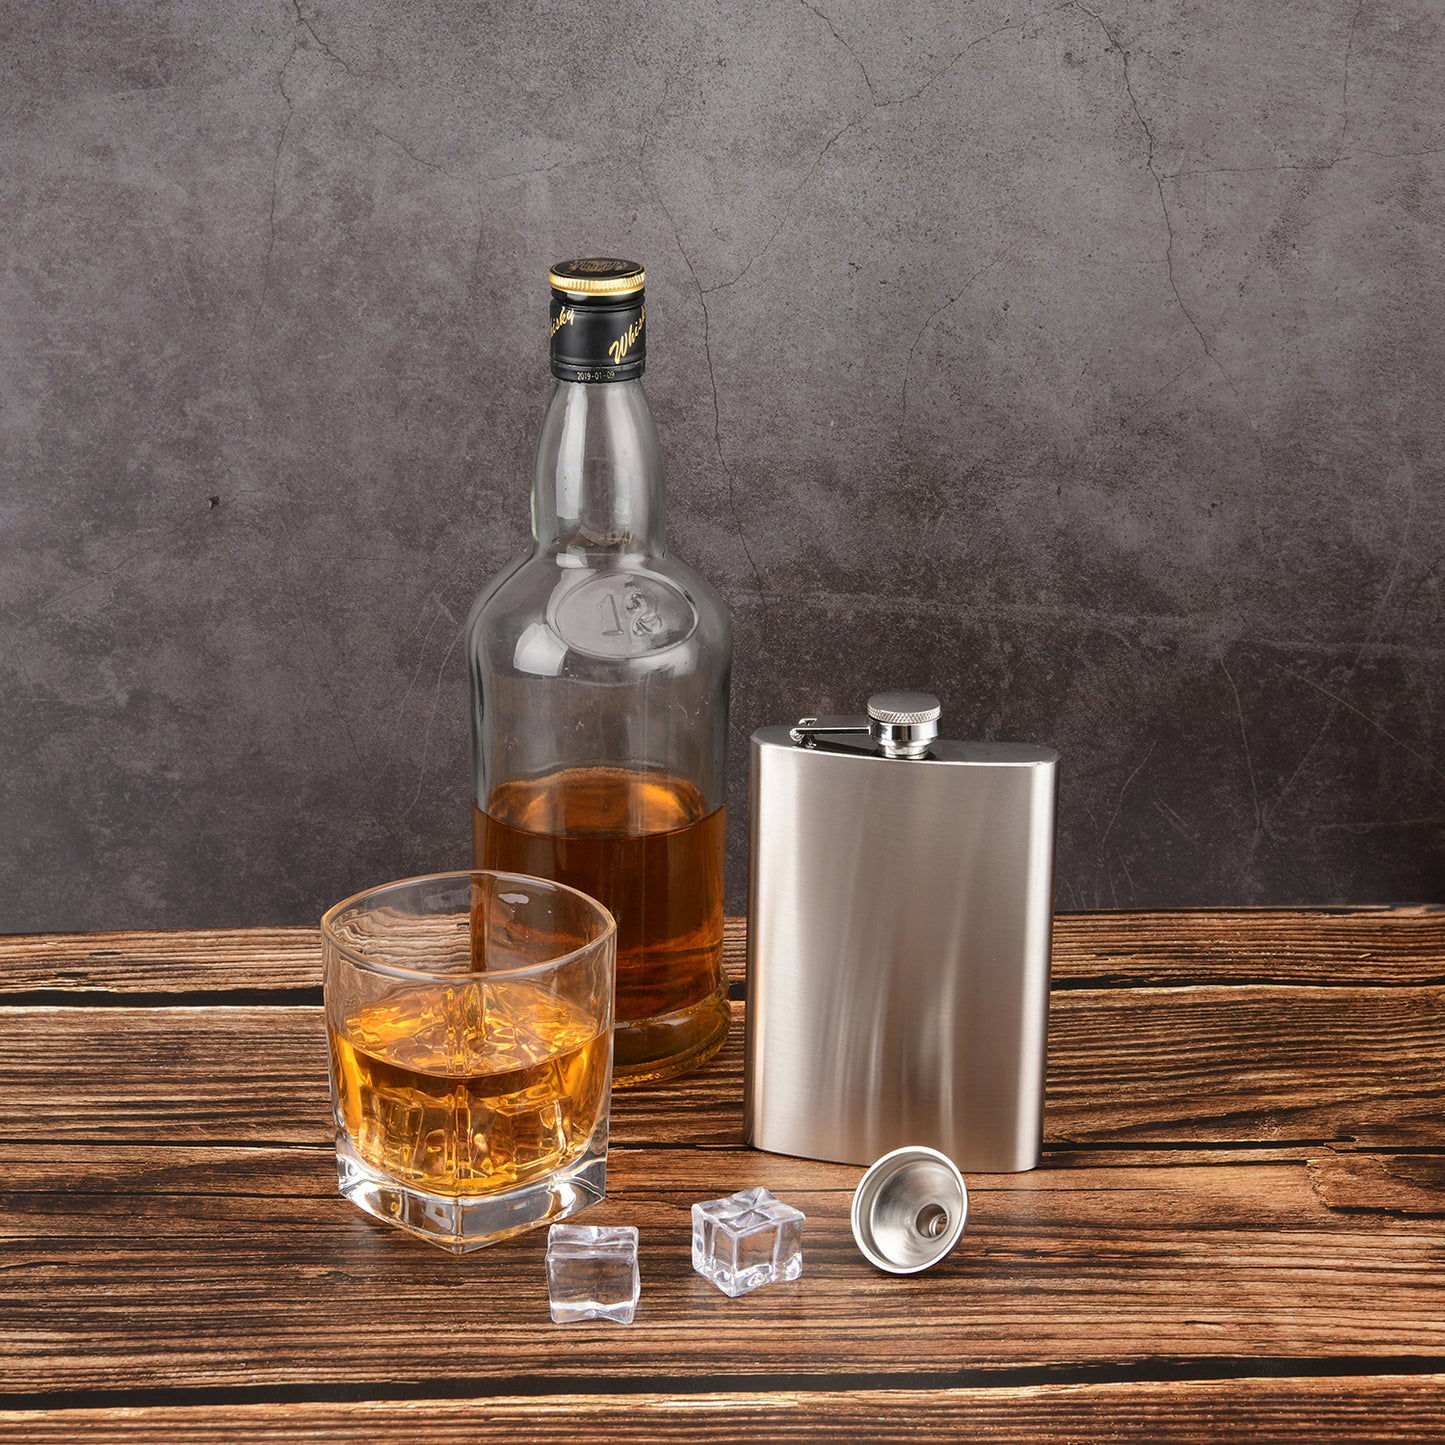 Design Your Own 12oz Hip Flask